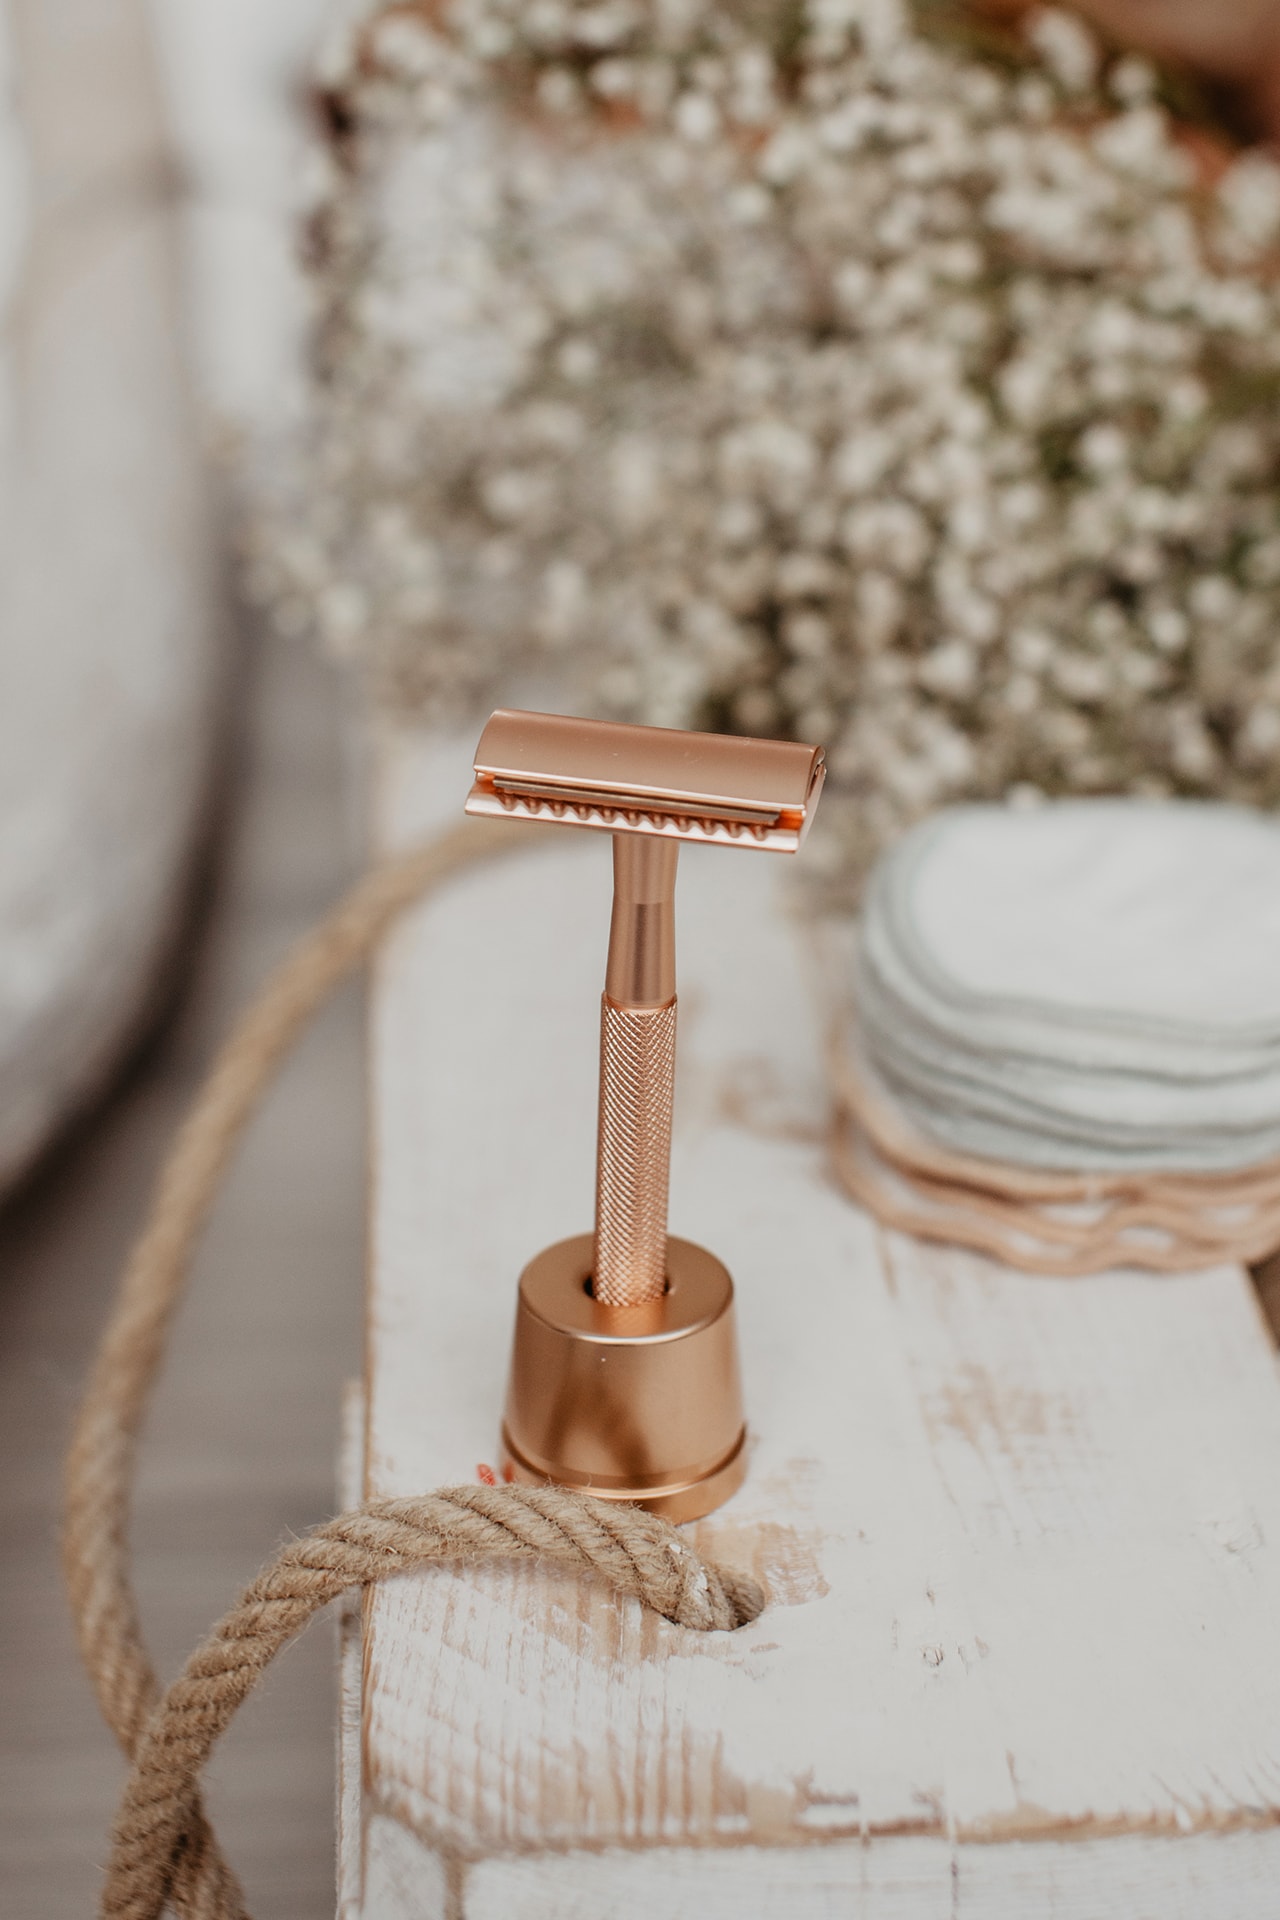 Bambaw Metal Safety Razor Review Zero Waste Shaving Sustainable Bathroom Rose Gold Stand Reusable Recyclable